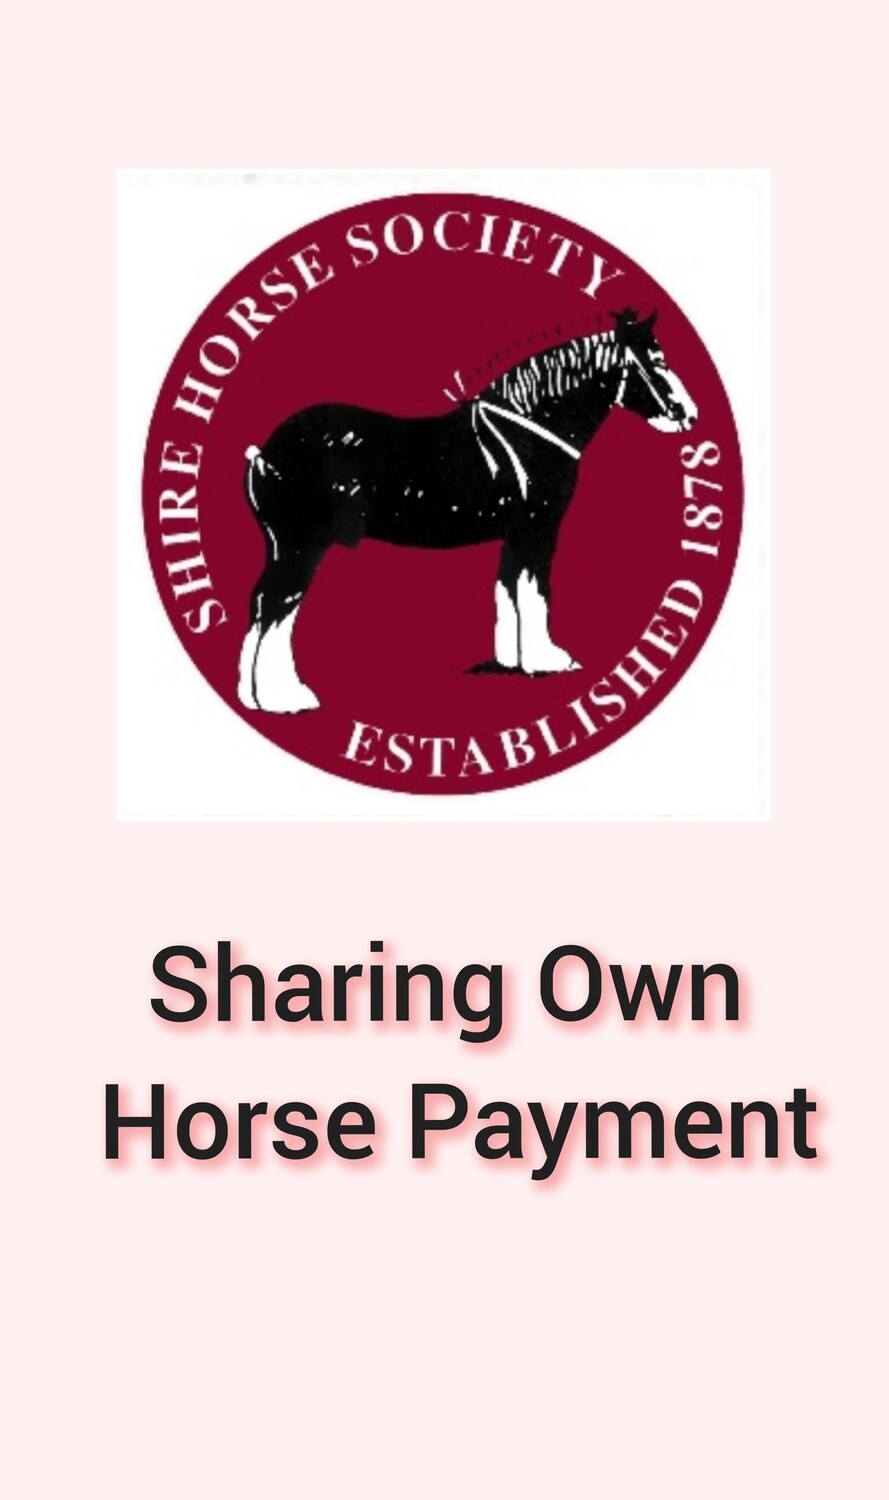 6. Second Person Sharing Own Horse